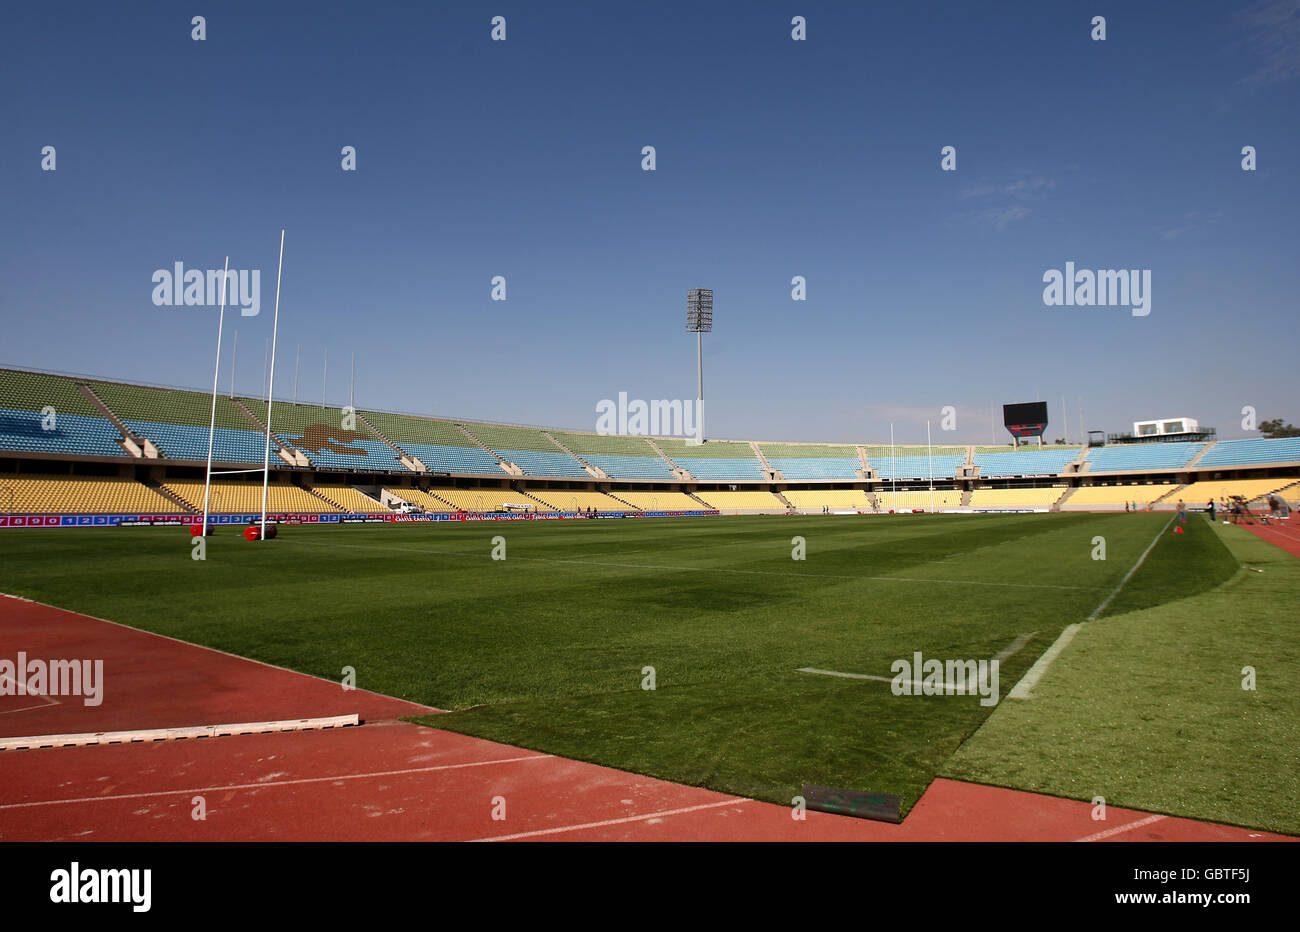 Rugby Union - British and Irish Lions Captain's Run - Royal Bafokeng Sports Palace. General view of the Royal Bafokeng Sports Palace, Rustenburg, South Africa. Stock Photo